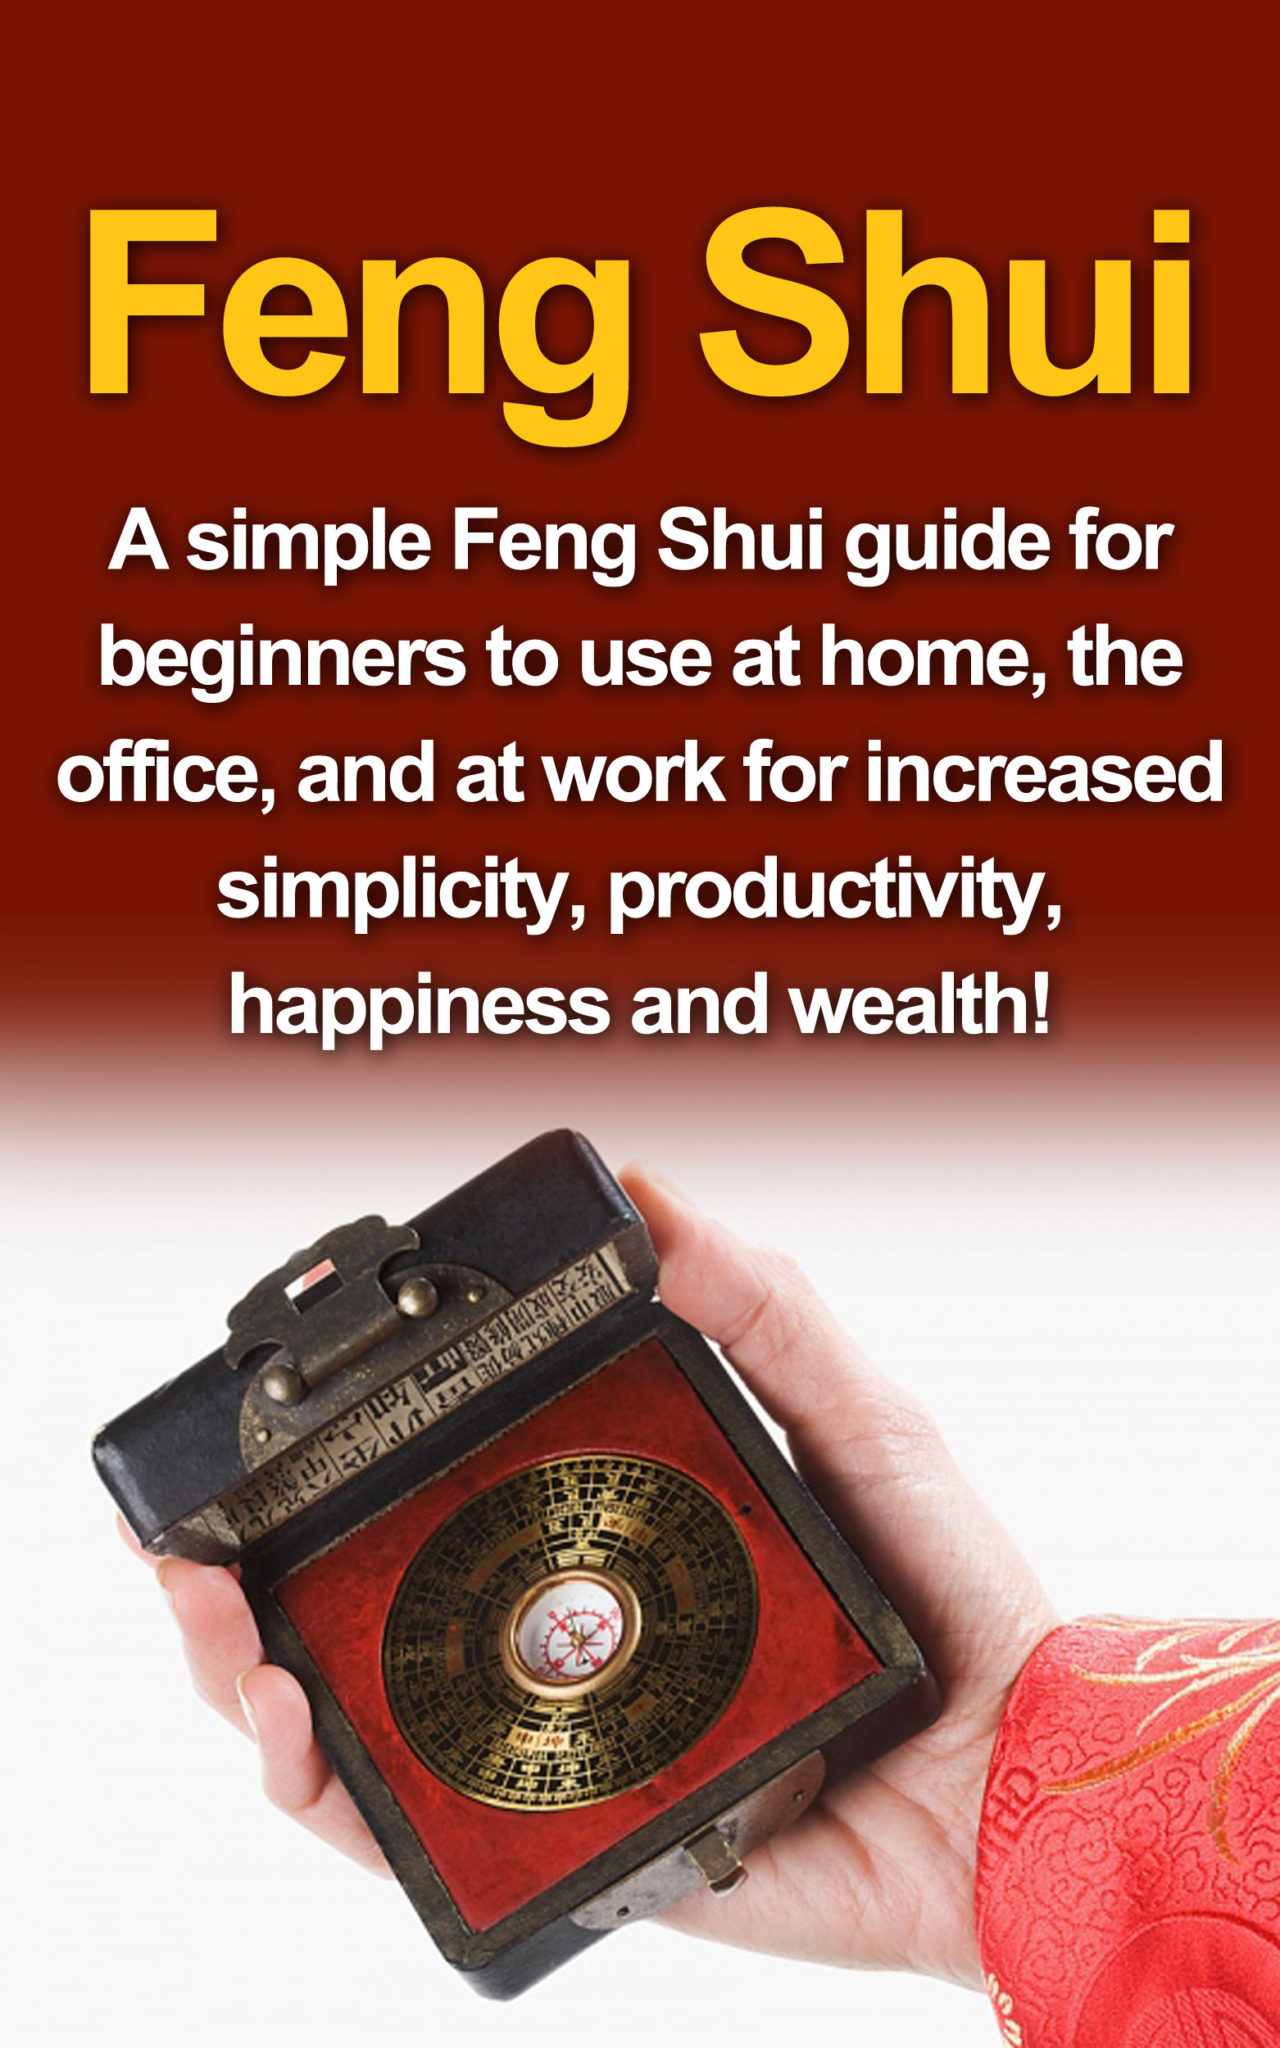 Feng Shui: A simple Feng Shui guide for beginners to use at home, the office, and at work for increased simplicity, productivity, happiness and wealth! by Amy Delosa